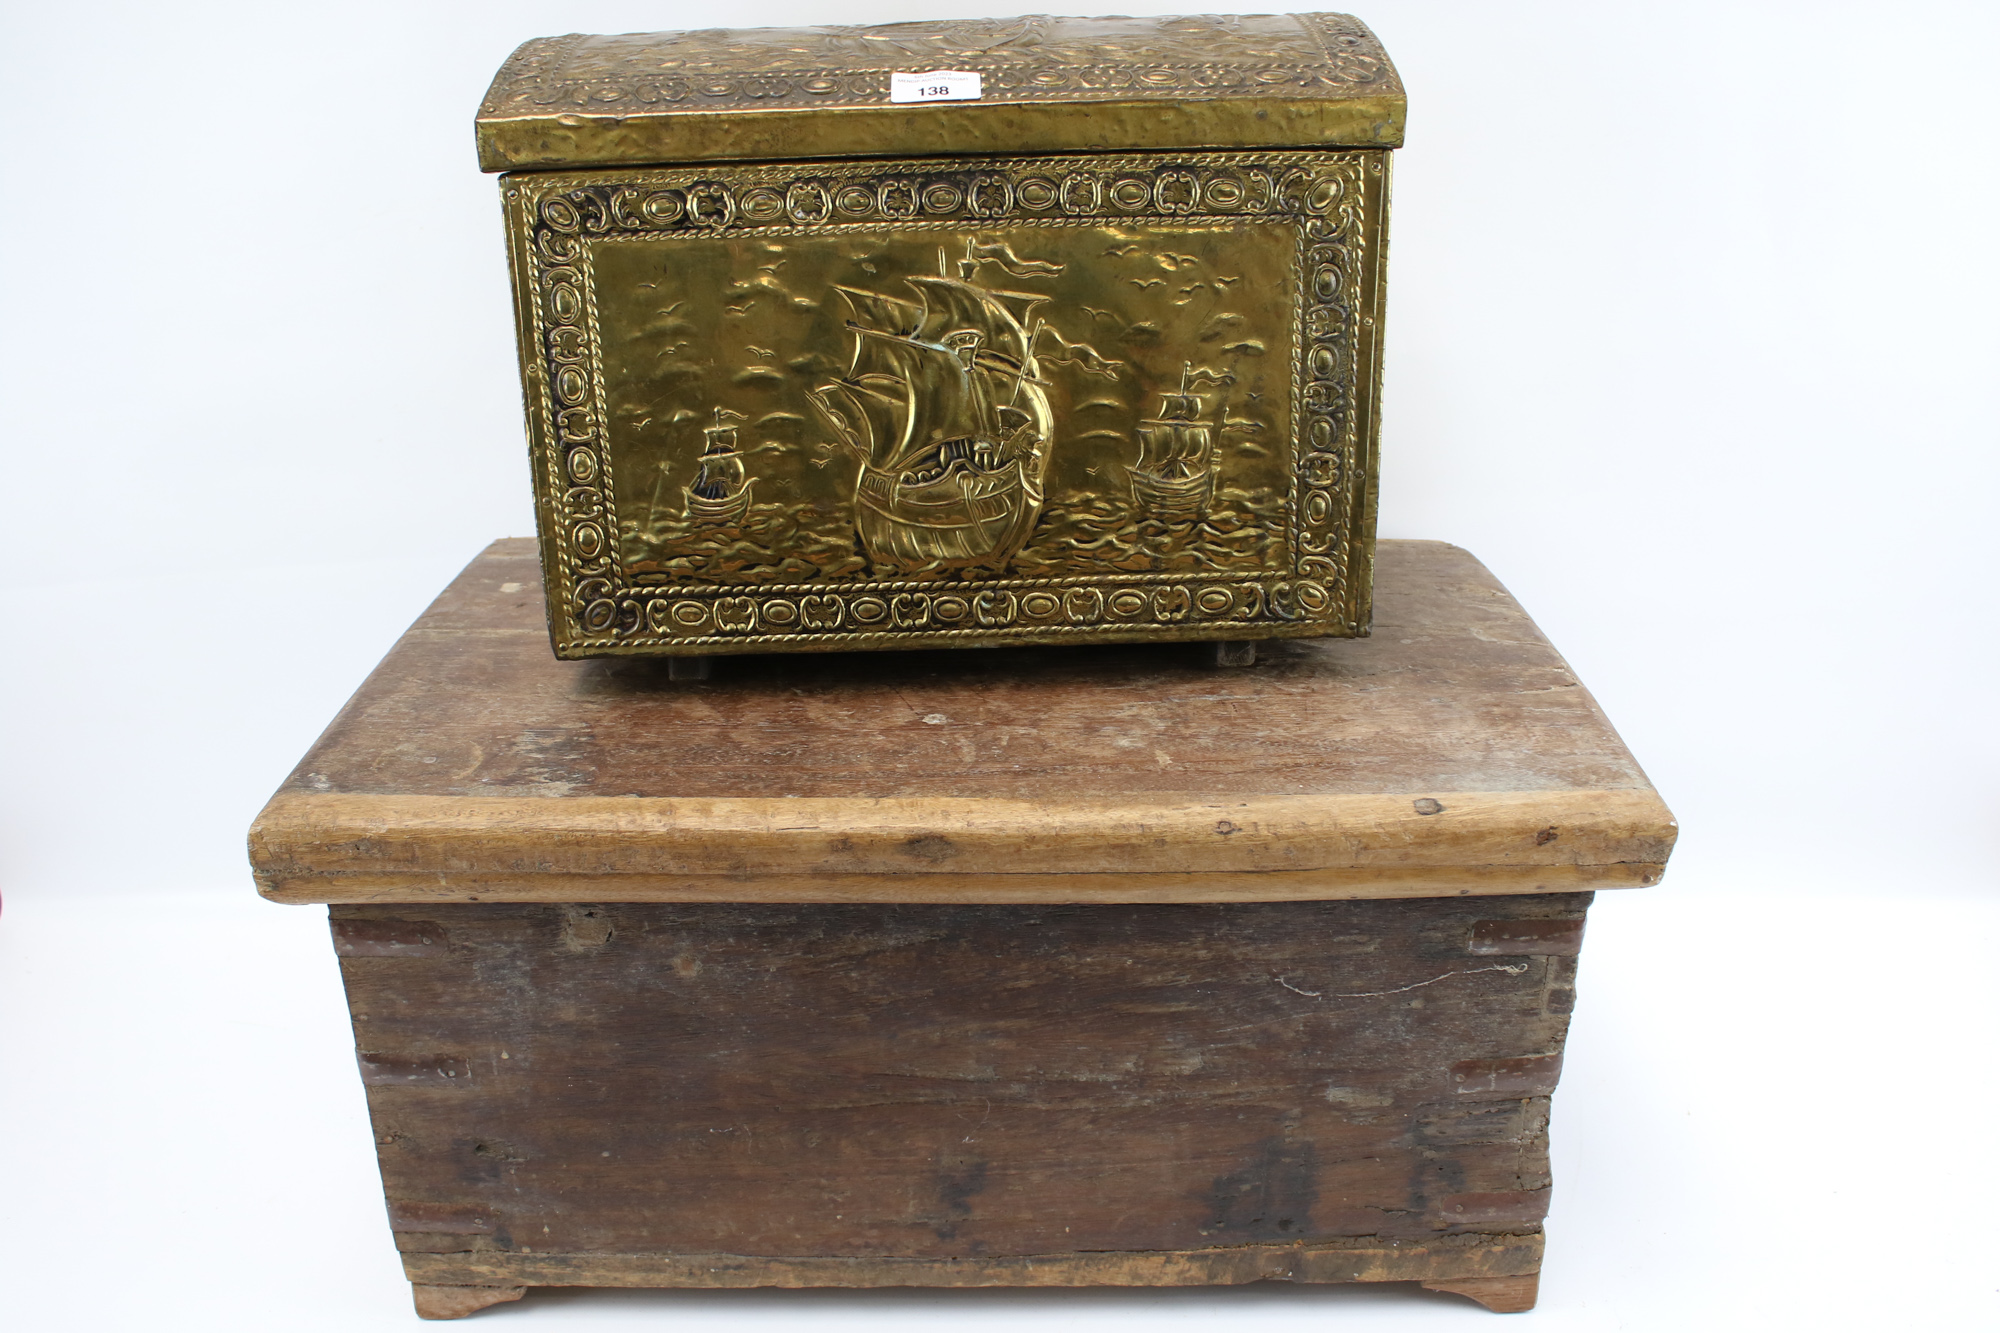 A vintage wooden trunk and a brass covered coal box. Max.